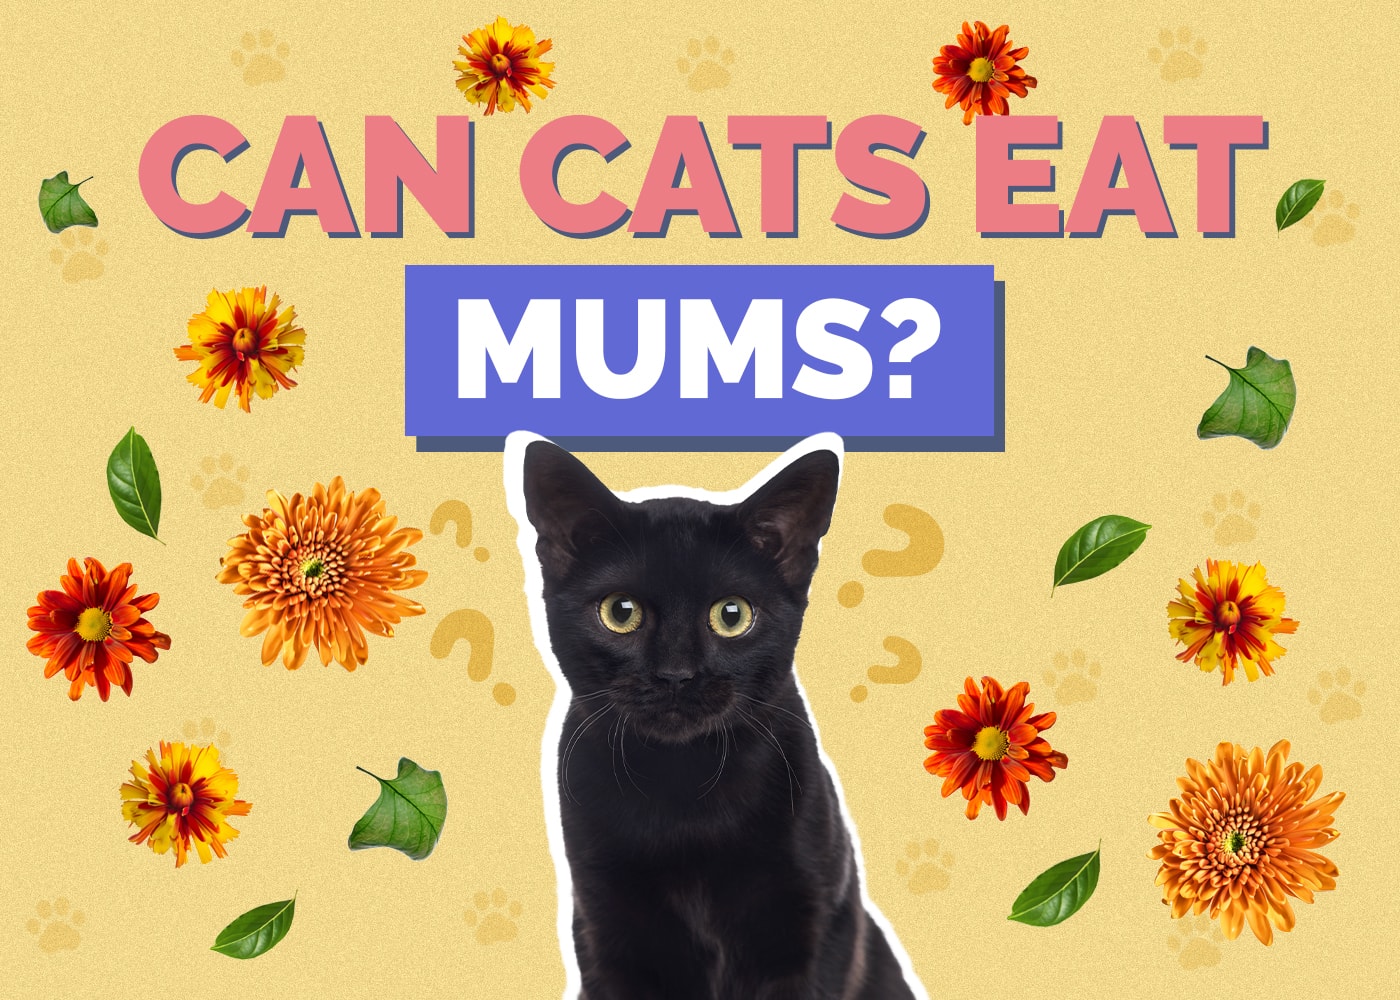 Can Cats Eat mums